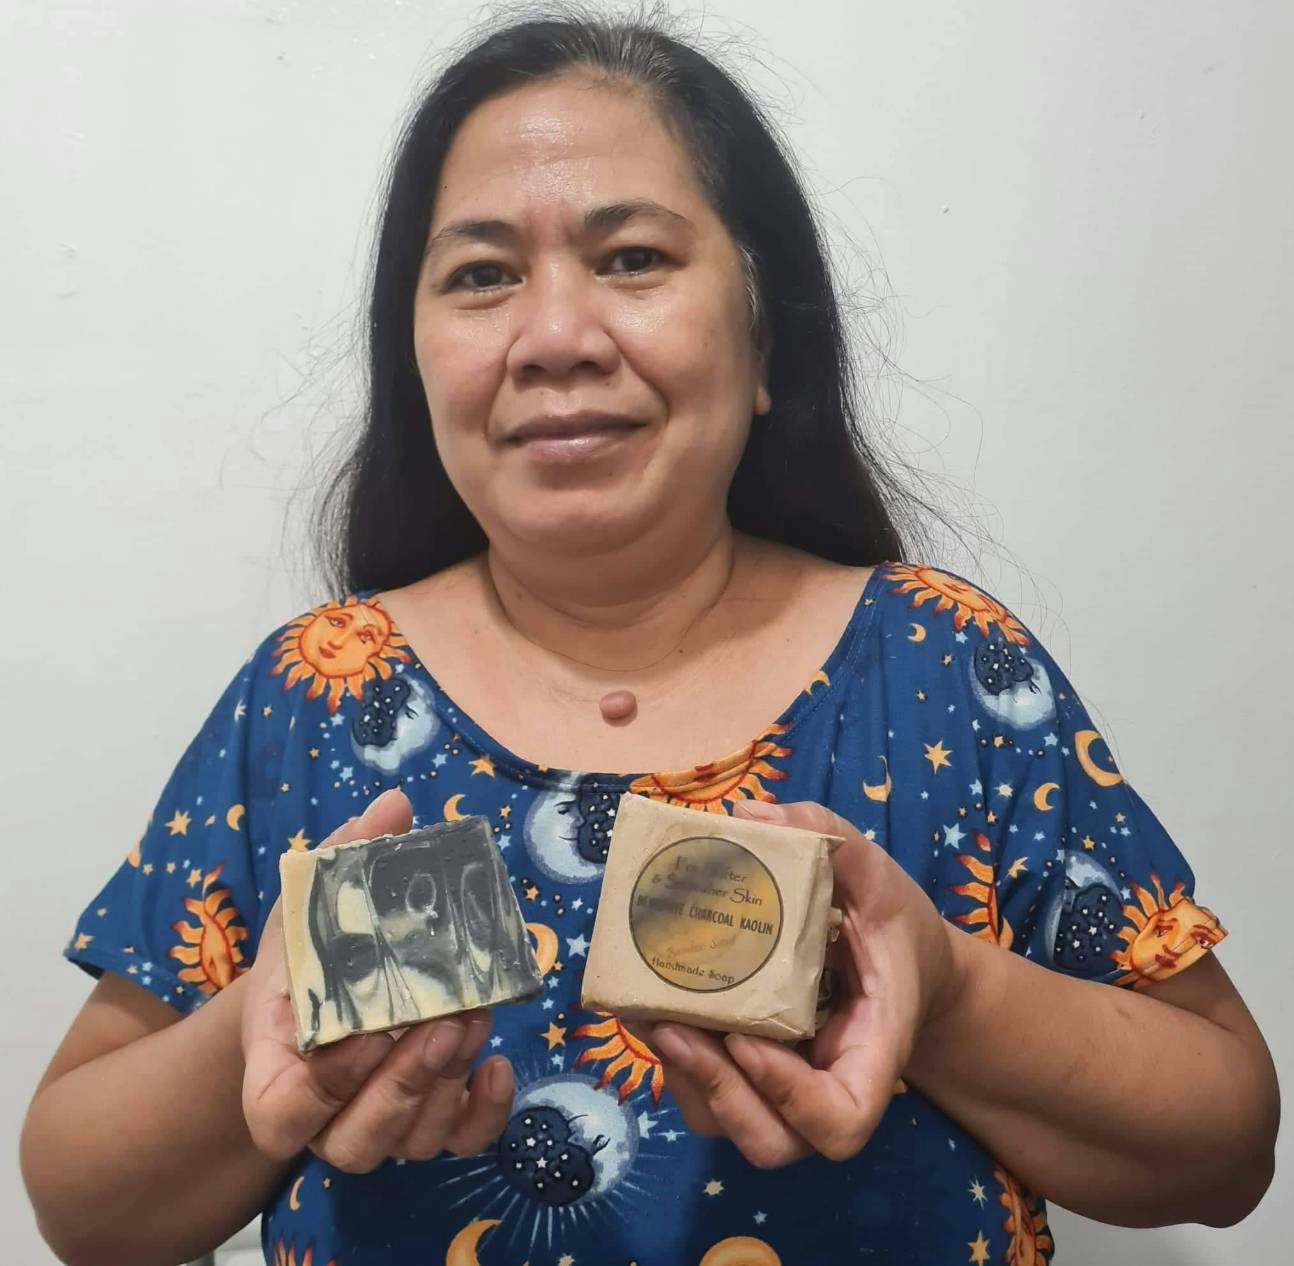 Espie De Villa, owner/operator of Mommy E's holding some of her skincare products